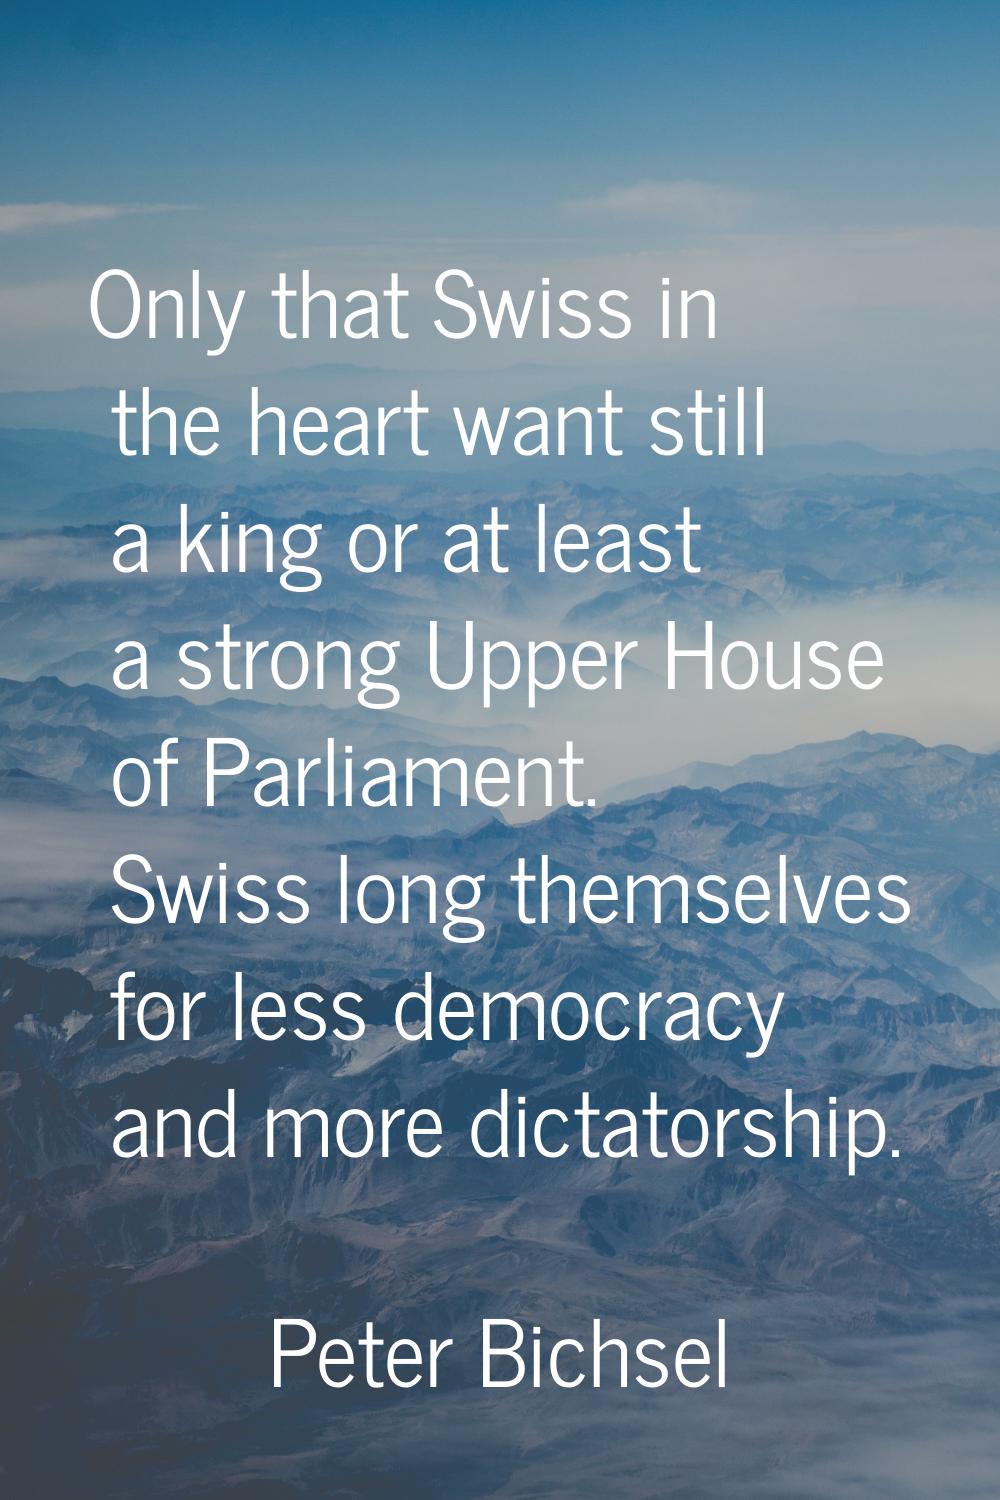 Only that Swiss in the heart want still a king or at least a strong Upper House of Parliament. Swis